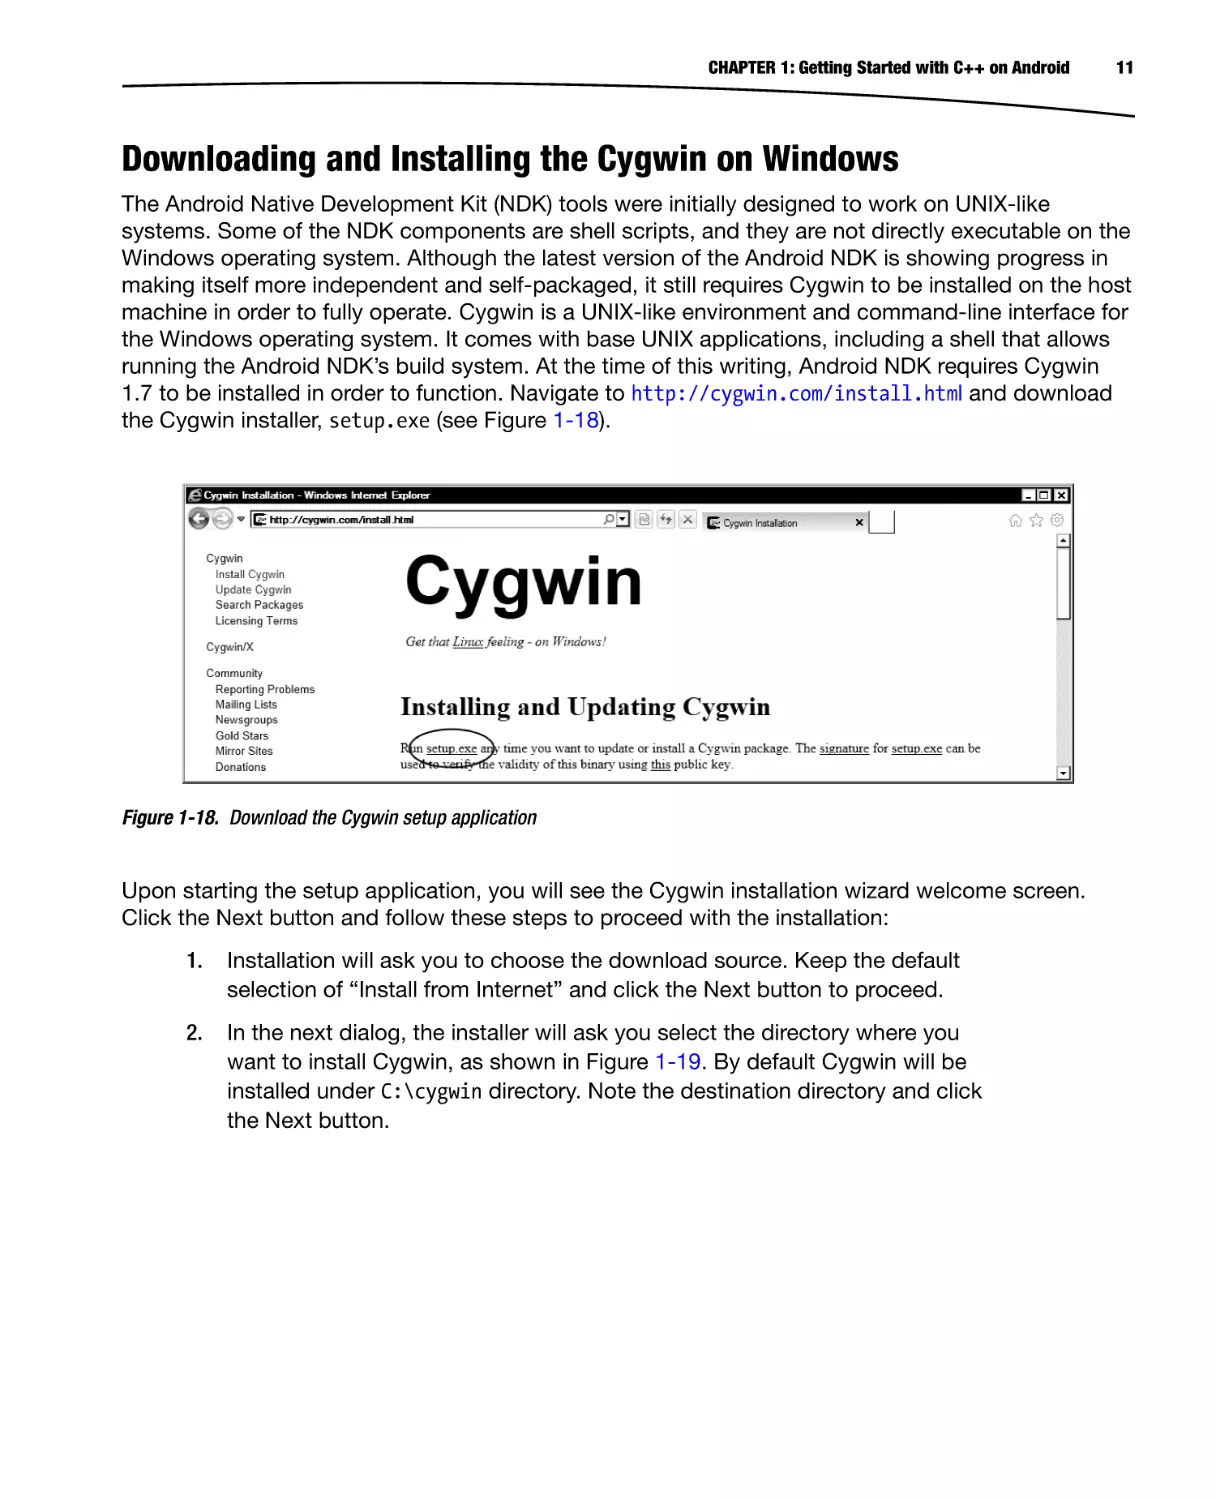 Downloading and Installing the Cygwin on Windows